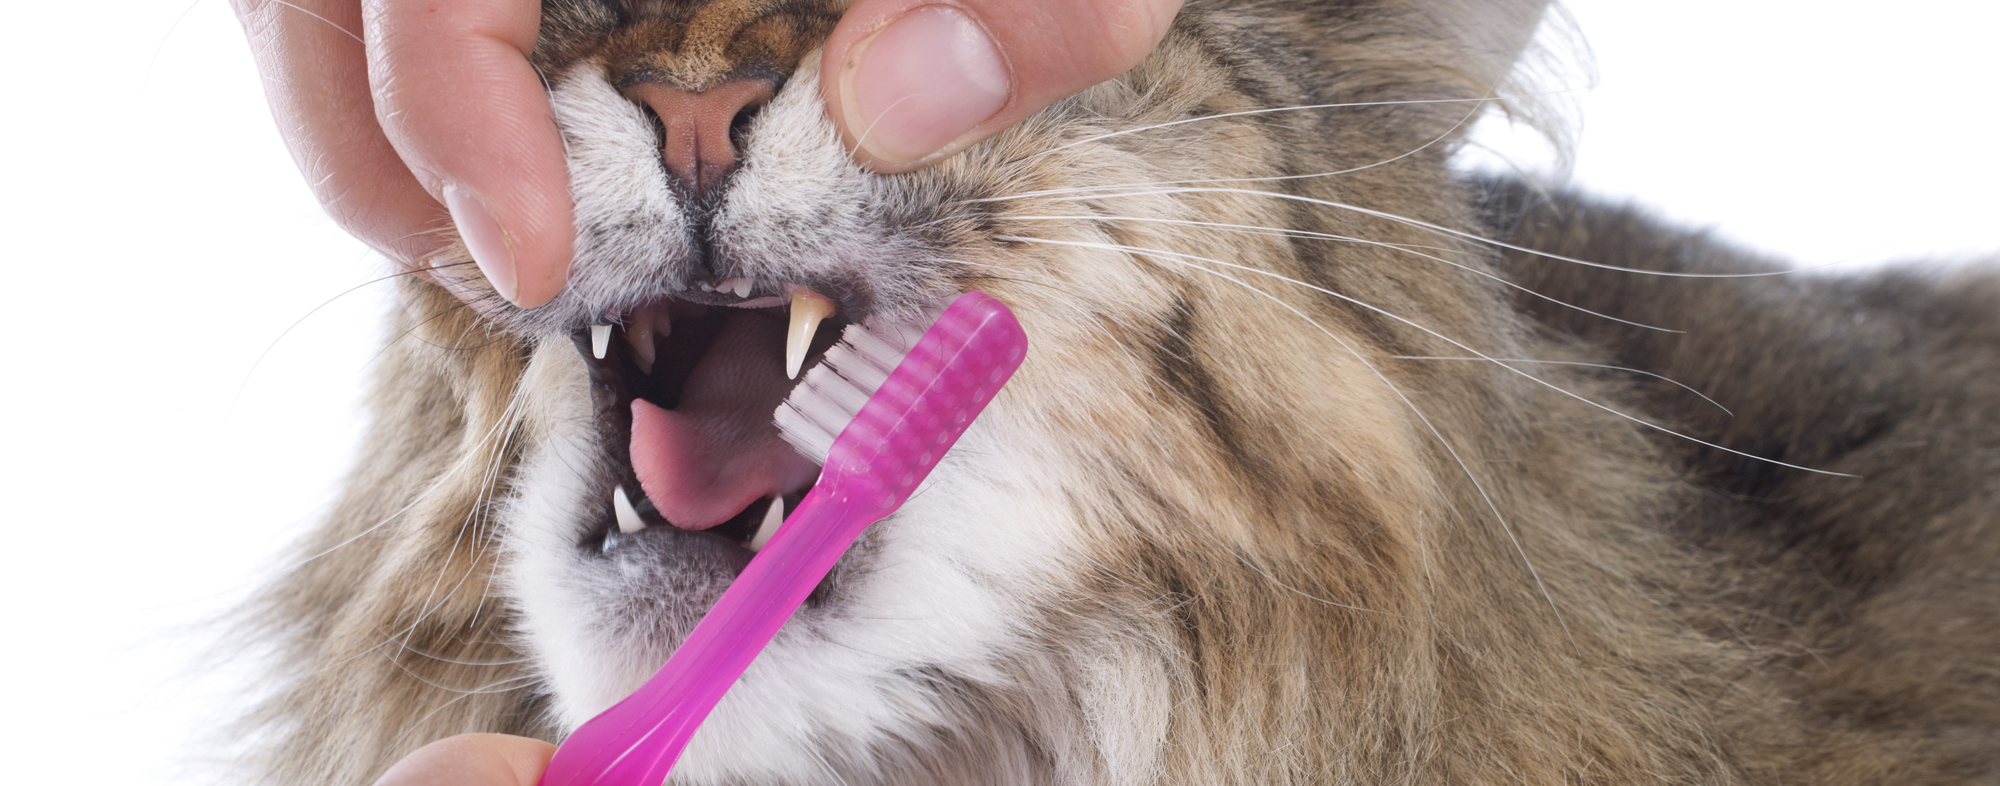 Cat having its teeth brushed by owner to prevent dental diseases